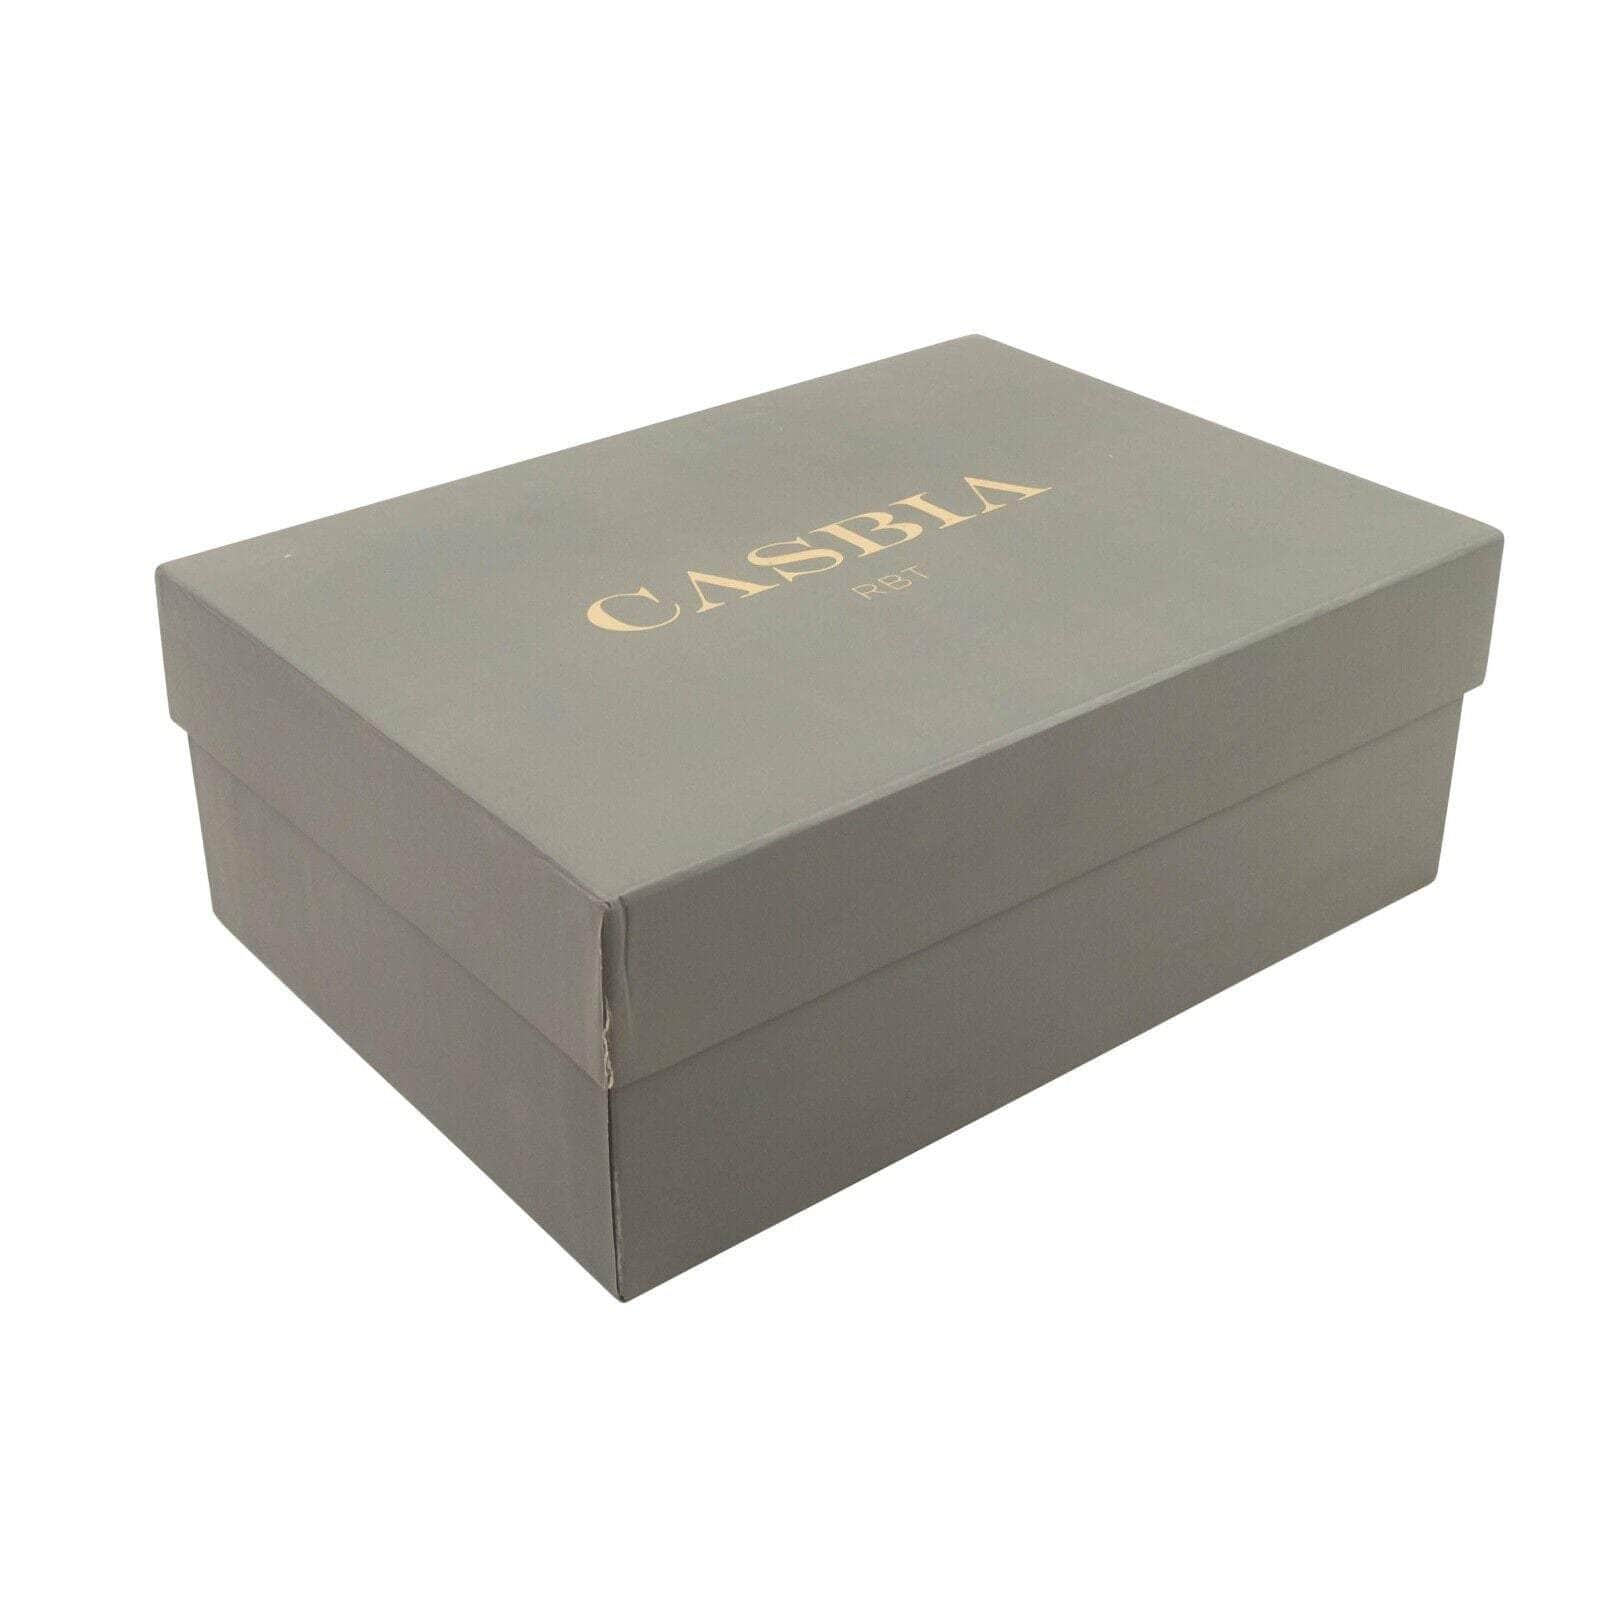 Casbia casbia, channelenable-all, chicmi, couponcollection, gender-mens, main-shoes, mens-shoes, MixedApparel, size-40, size-41, size-42, size-43, size-44, size-45, size-46, under-250 Grey Suede William RBT Sneakers